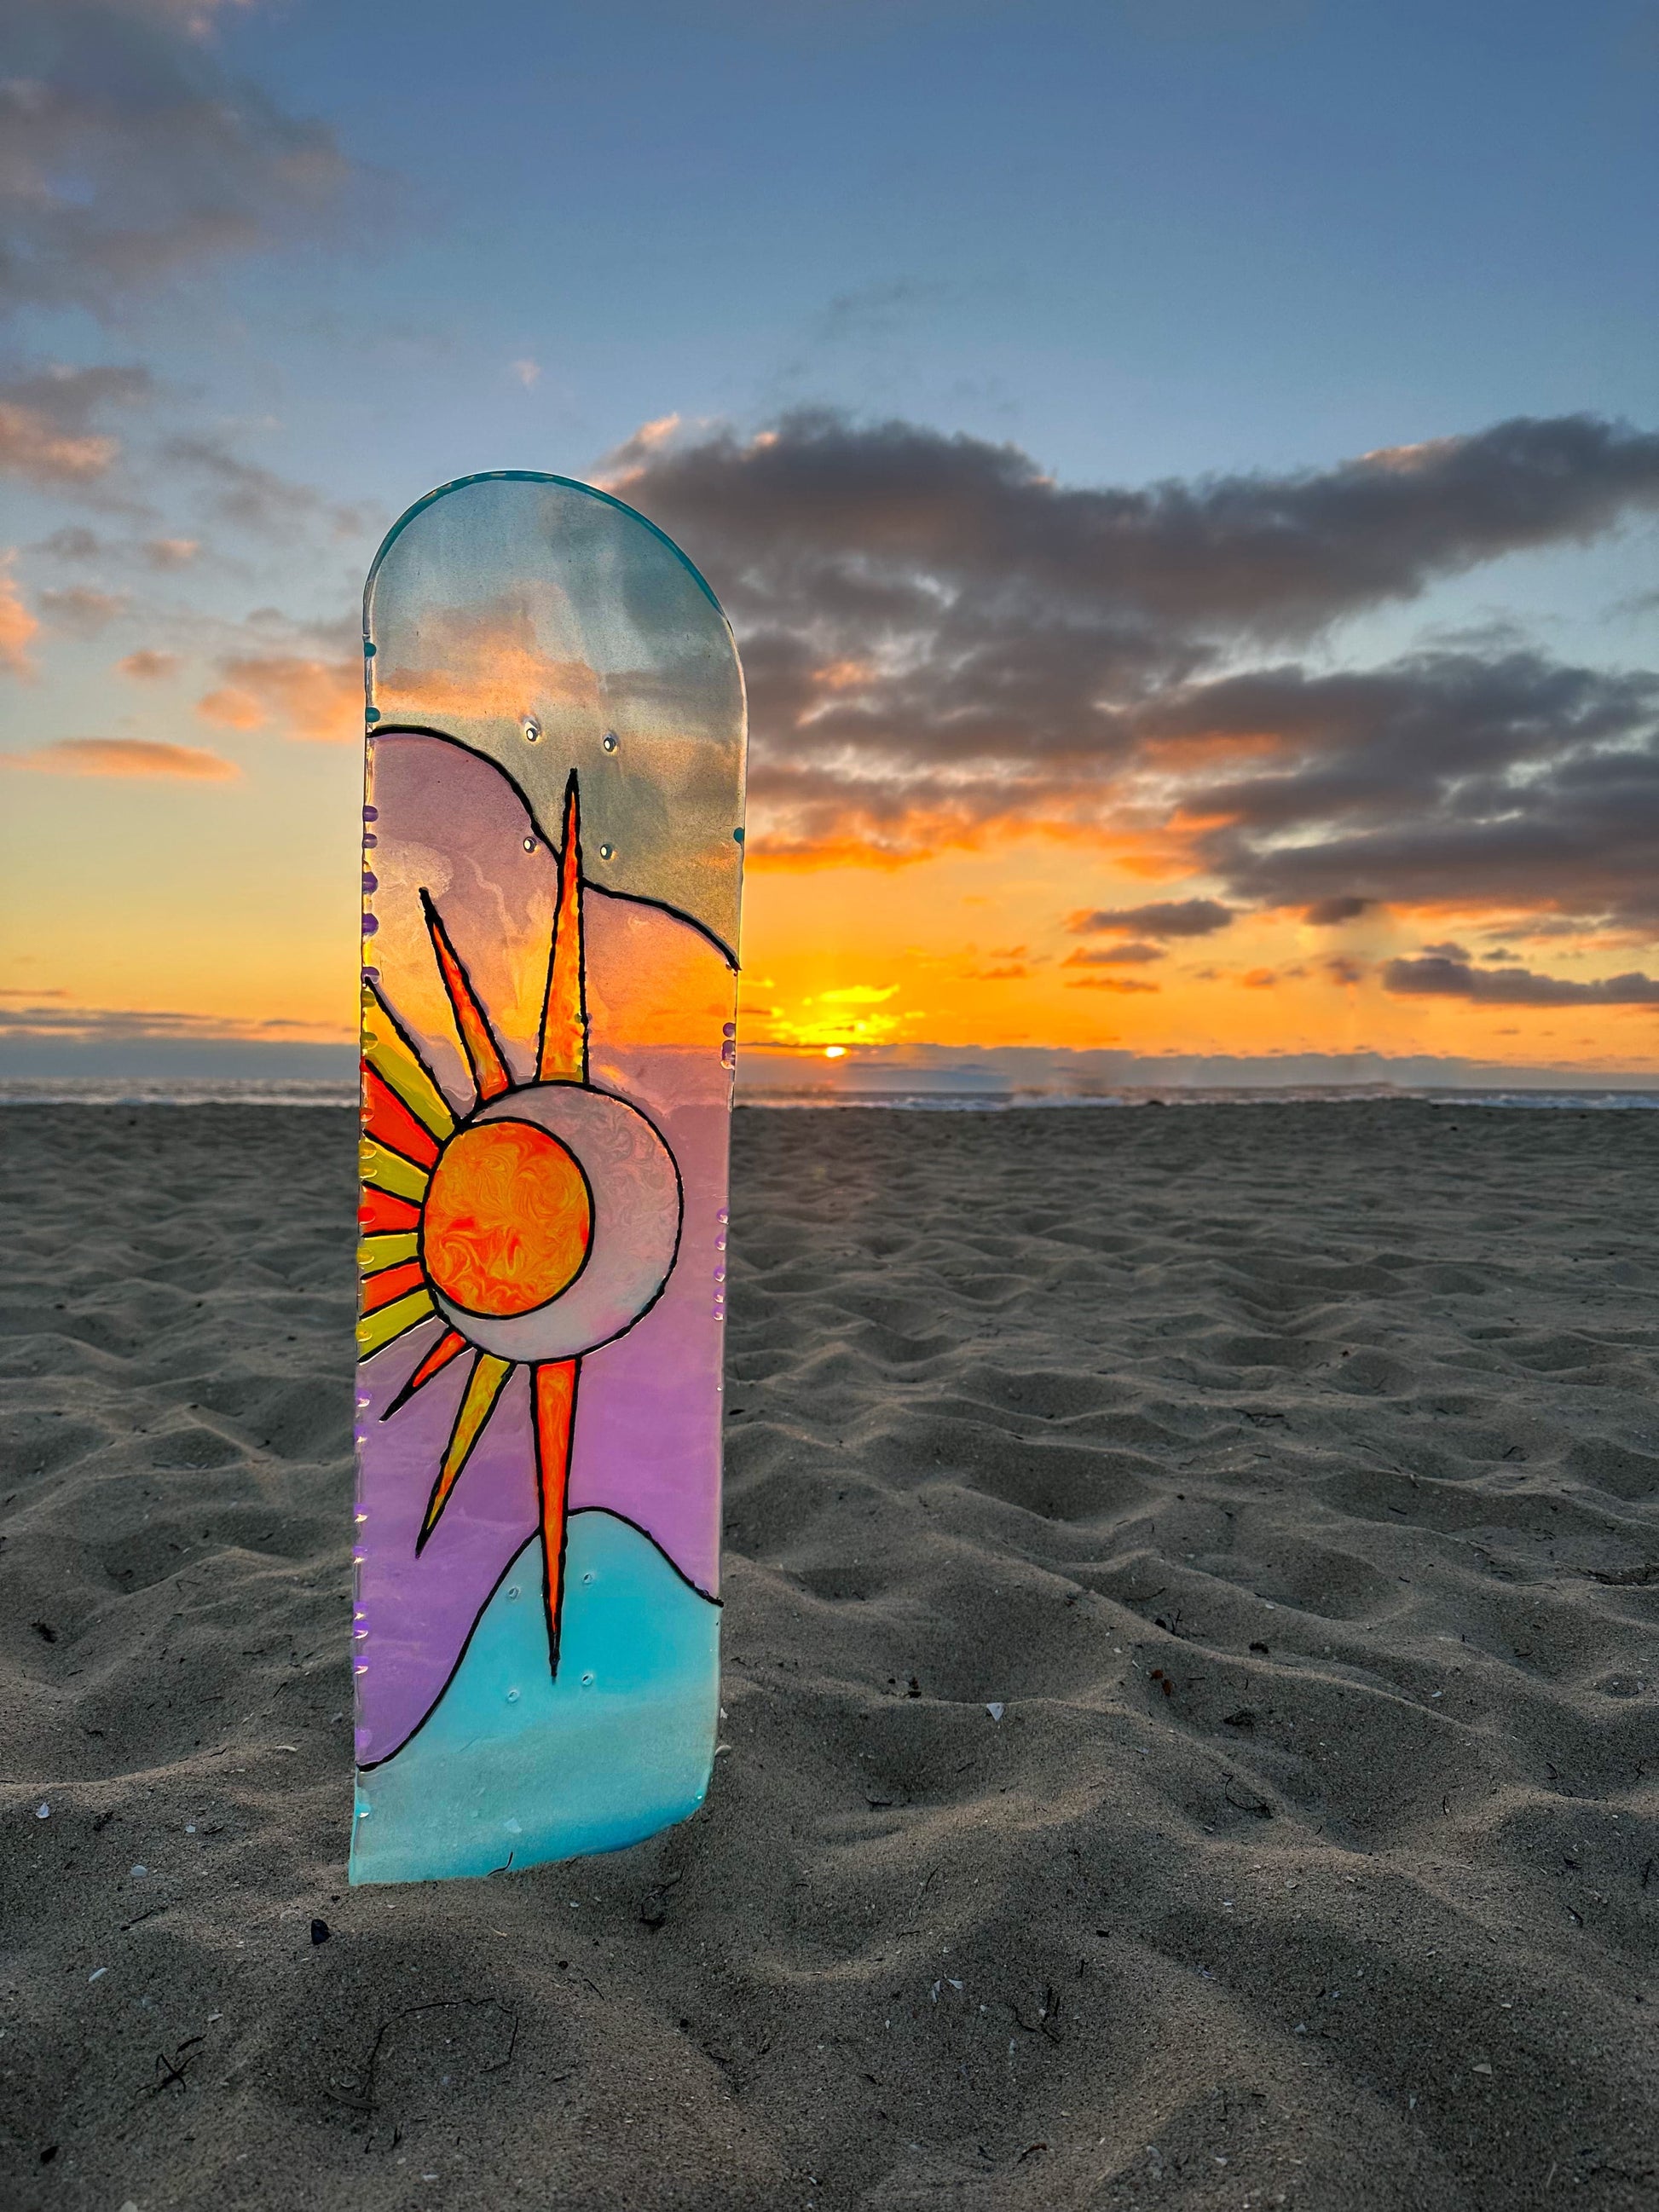 Purple and blue stained glass 'Sun and Moon' skateboard wall art at beach during sunset.